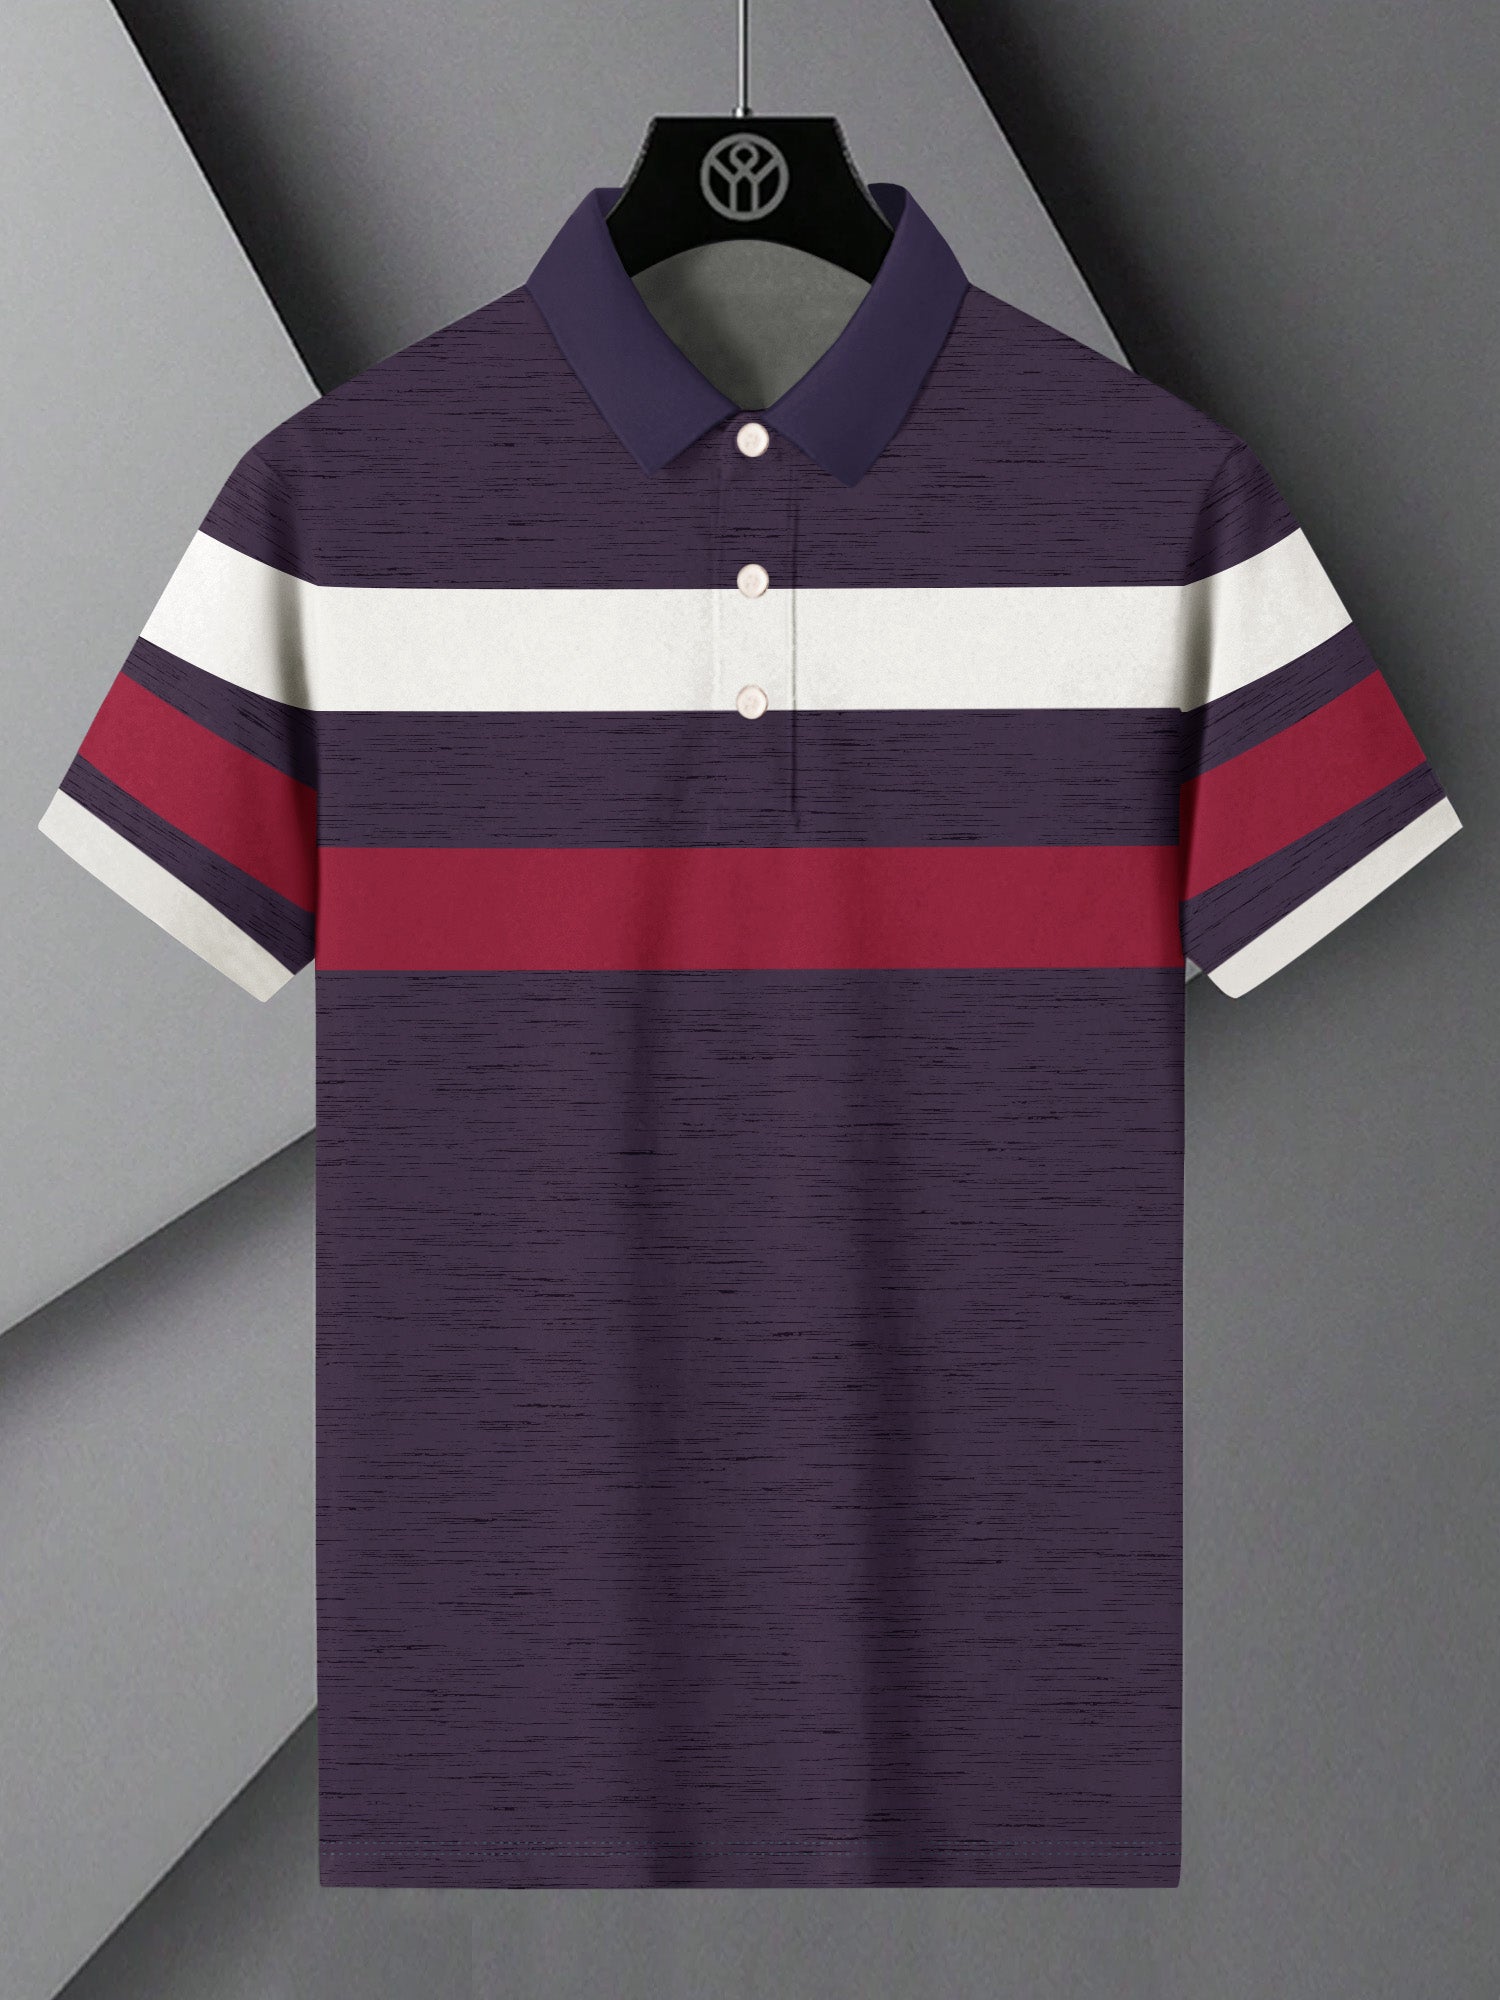 NXT Summer Polo Shirt For Men-Purple Melange with White & Red Stripe-BE738/BR12988